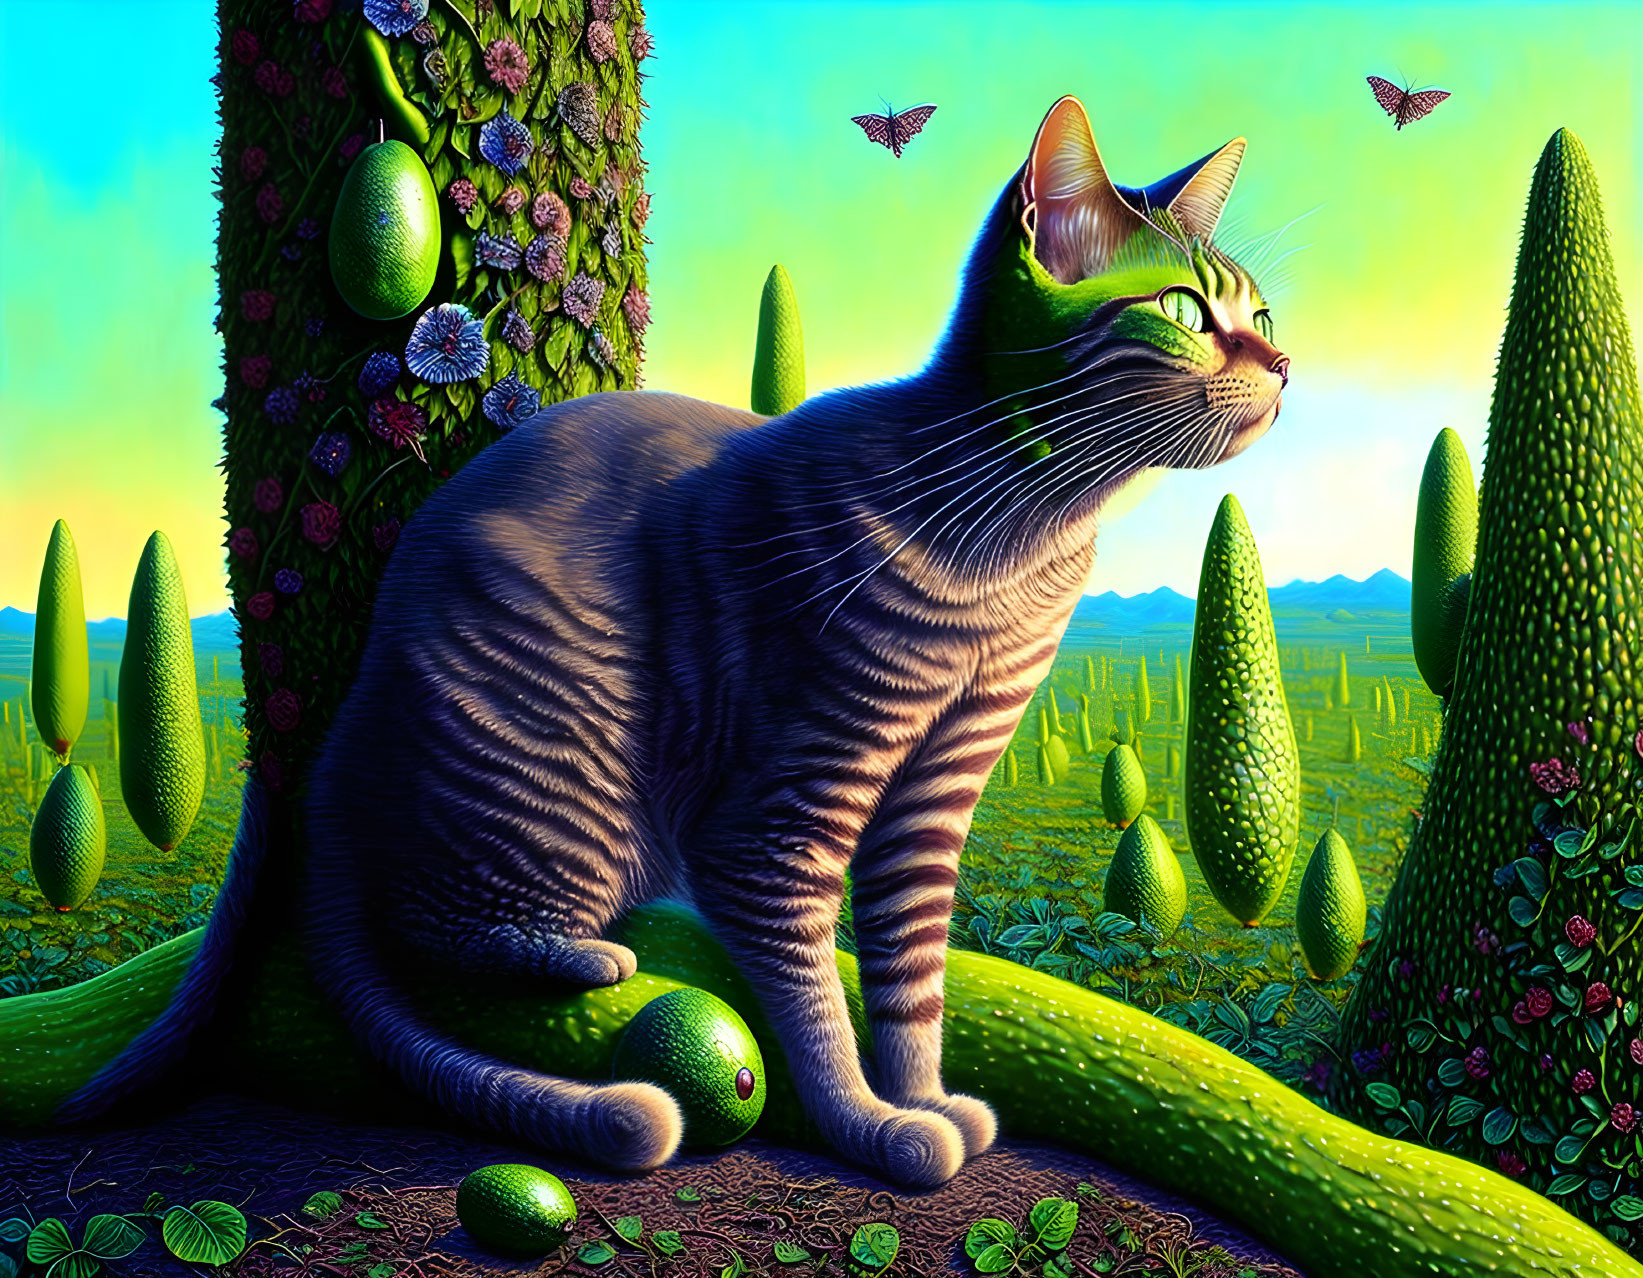 Colorful Artwork of Striped Cat in Whimsical Green Landscape